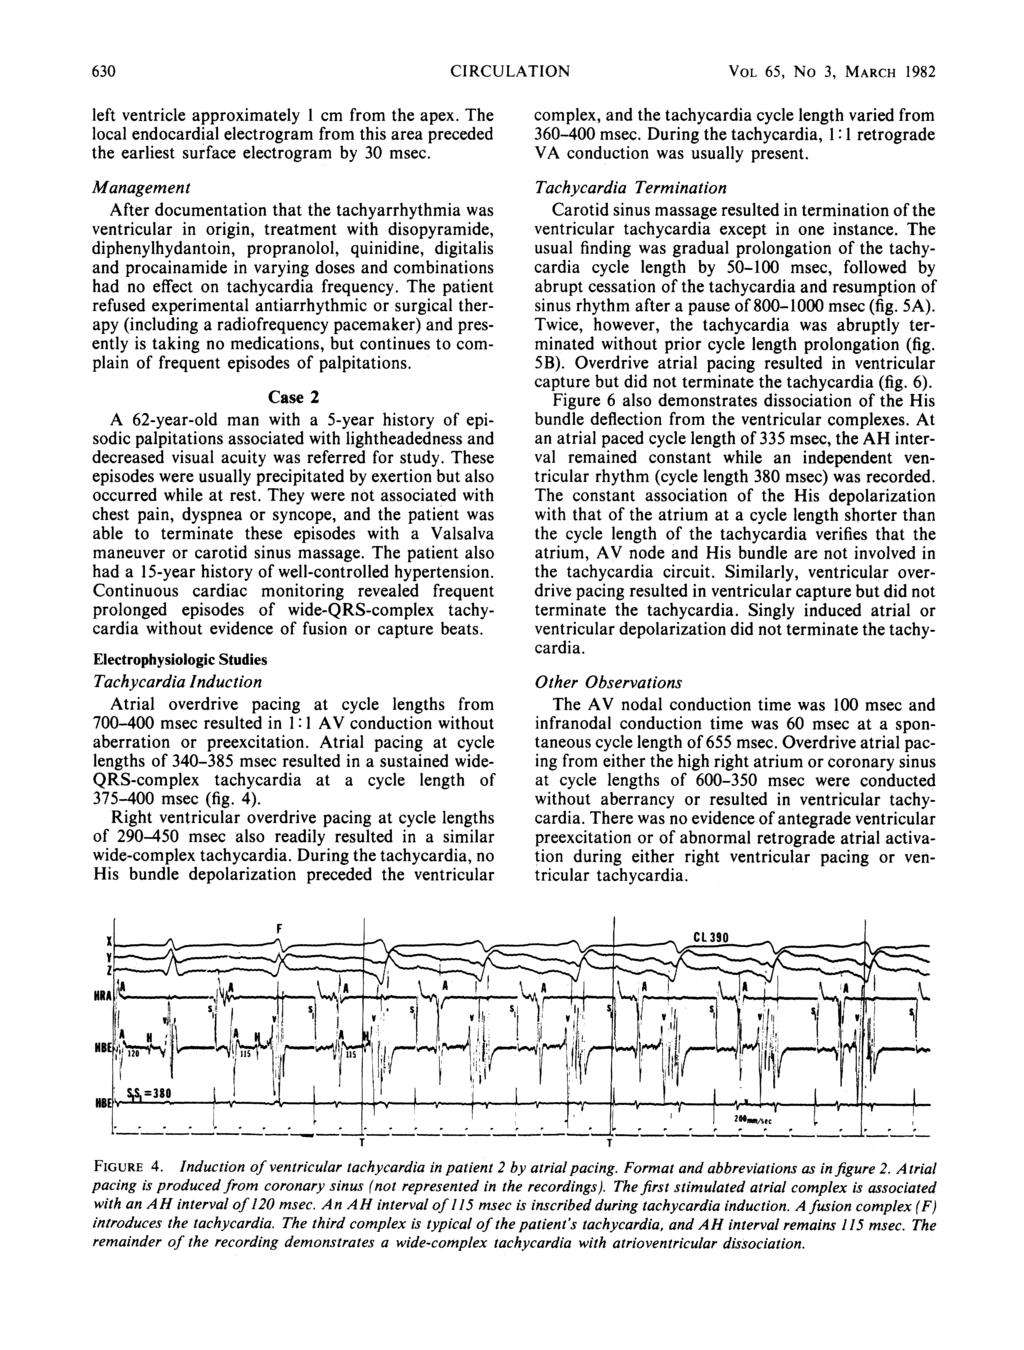 630 CIRCULATION VOL 65, No 3, MARCH 1982 left ventricle approximately 1 cm from the apex. The local endocardial electrogram from this area preceded the earliest surface electrogram by 30 msec.